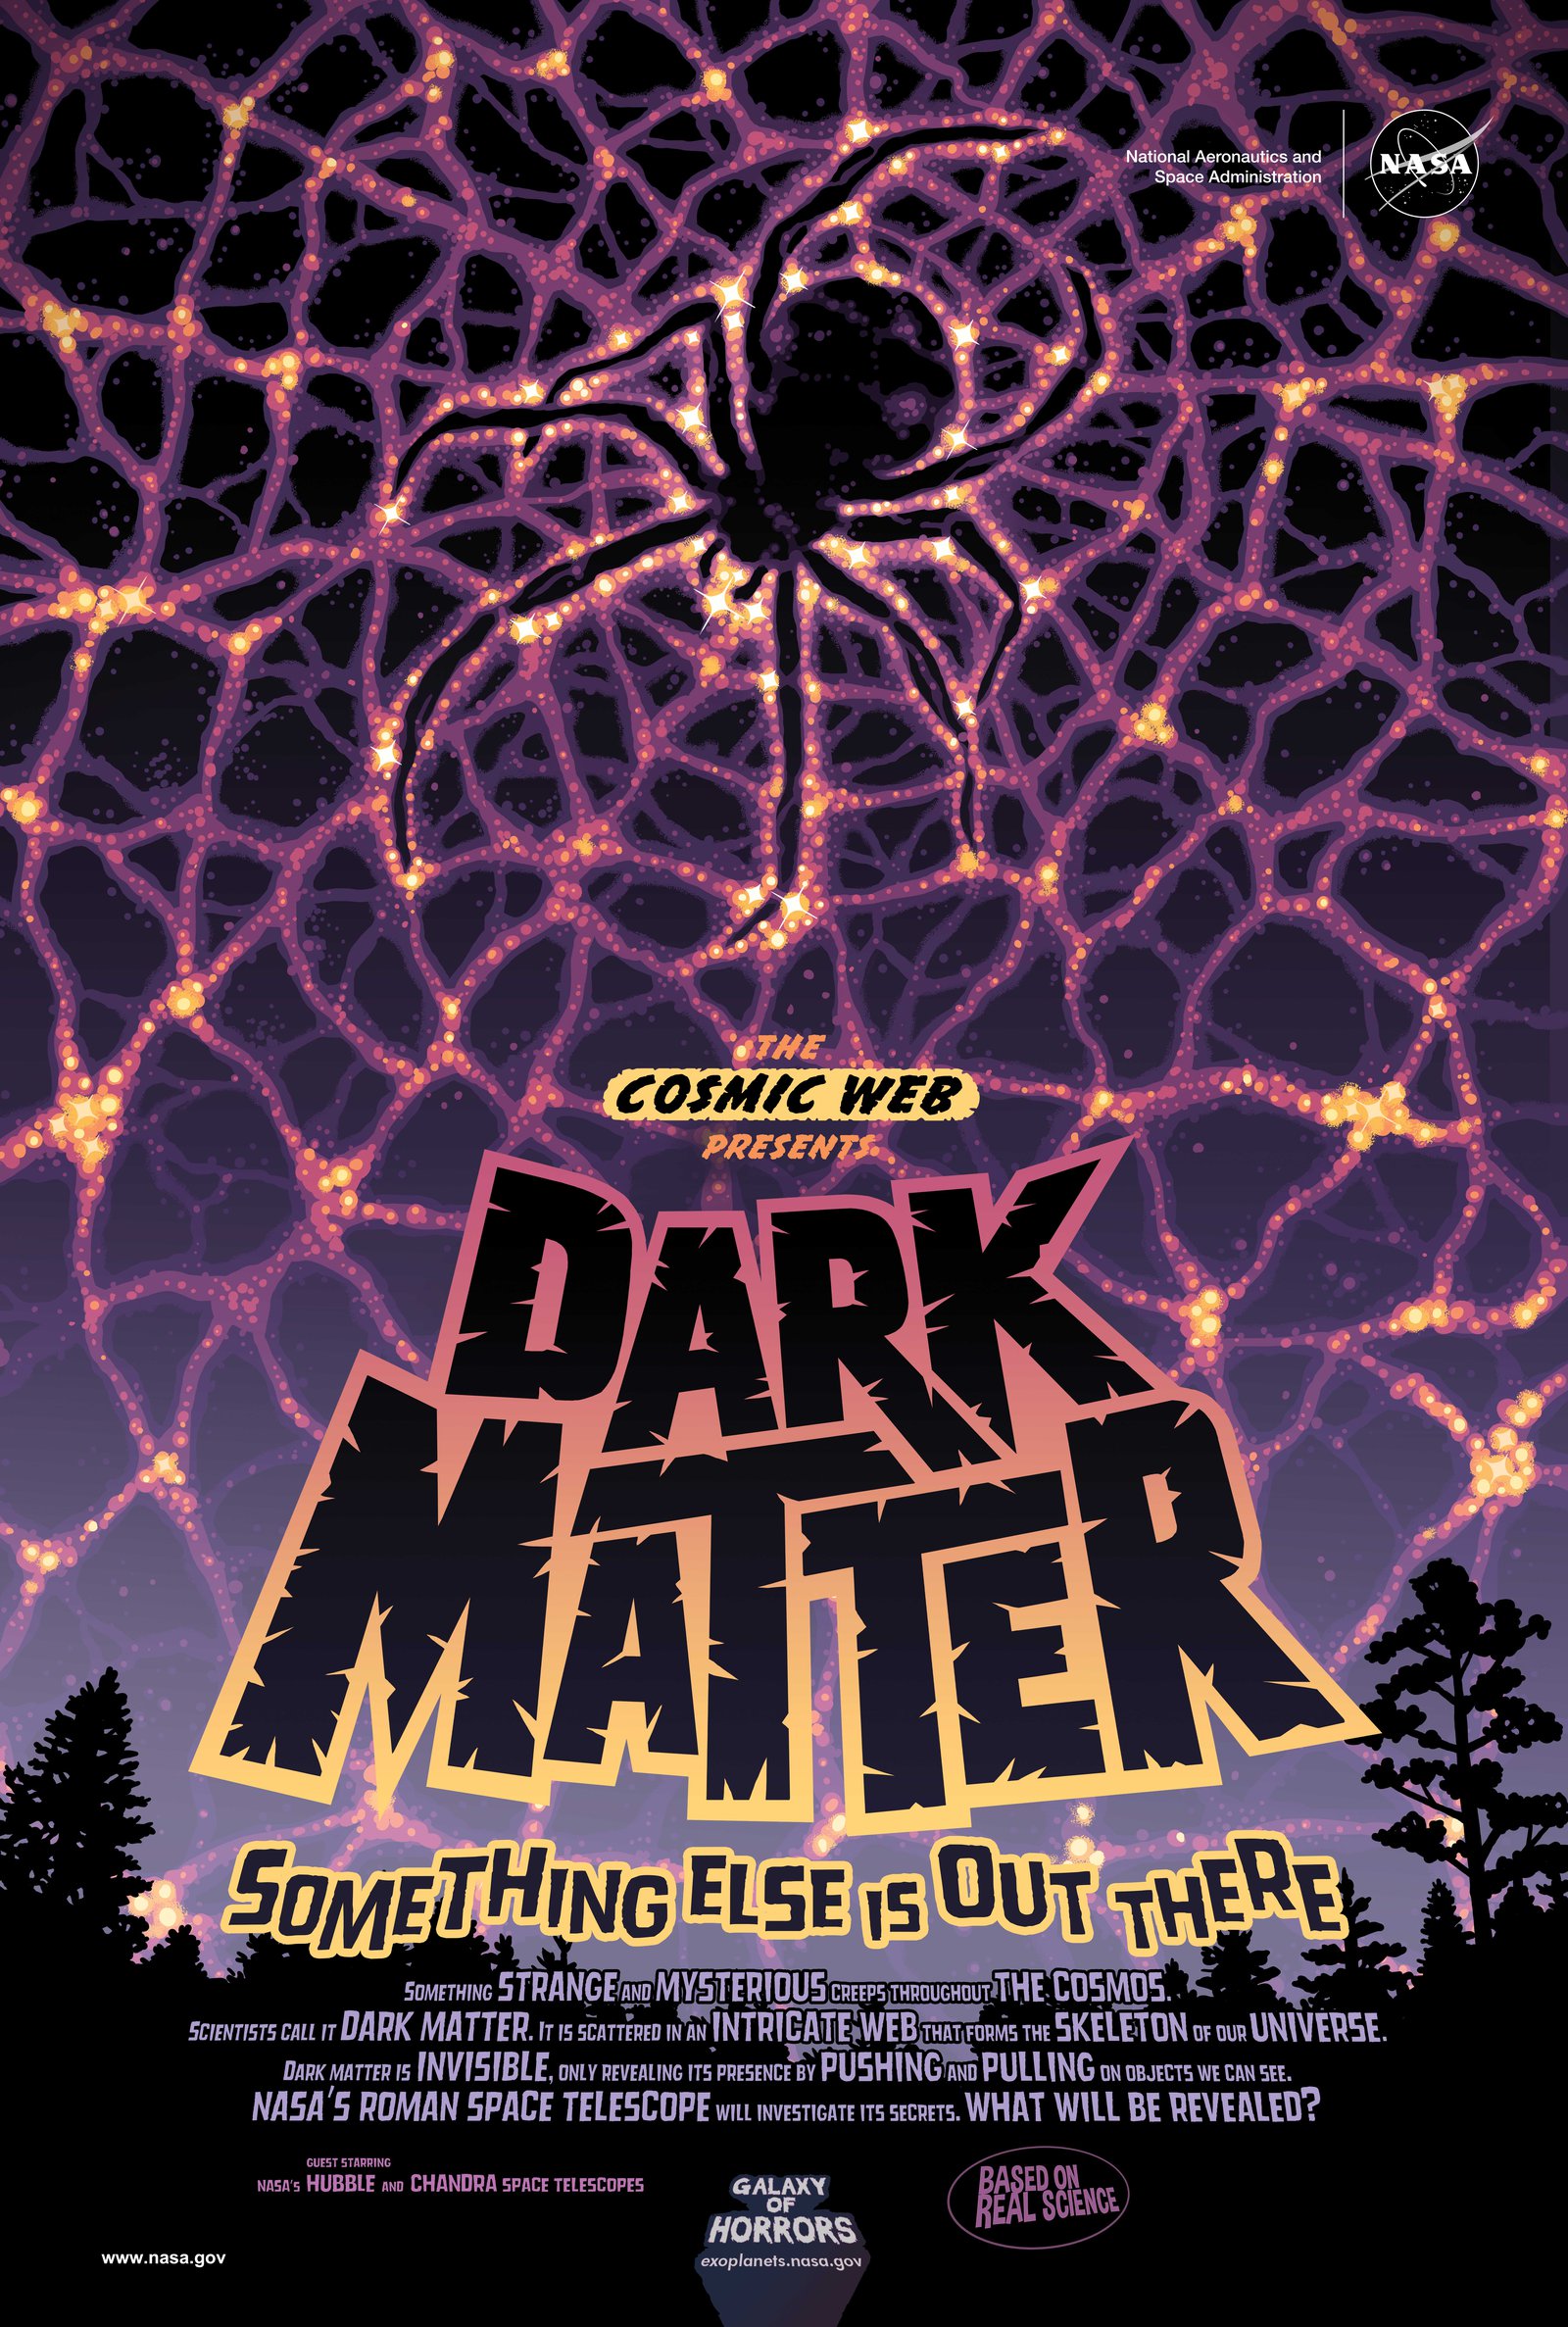 An informational poster about dark matter. The poster says, The cosmic web presents… Dark Matter. Something else is out there. Something strange and mysterious creeps throughout the cosmos. Scientists call it dark matter. It is scattered in an intricate web that forms the skeleton of our universe. Dark matter is invisible, only revealing its presence by pushing and pulling on objects we can see. NASA’s Roman Space Telescope will investigate its secrets. What will be revealed? The poster looks like an advertisement for a horror movie; there is a large spider sitting on a web of dark matter threads. Dark matter is written in large, black, blocky font.